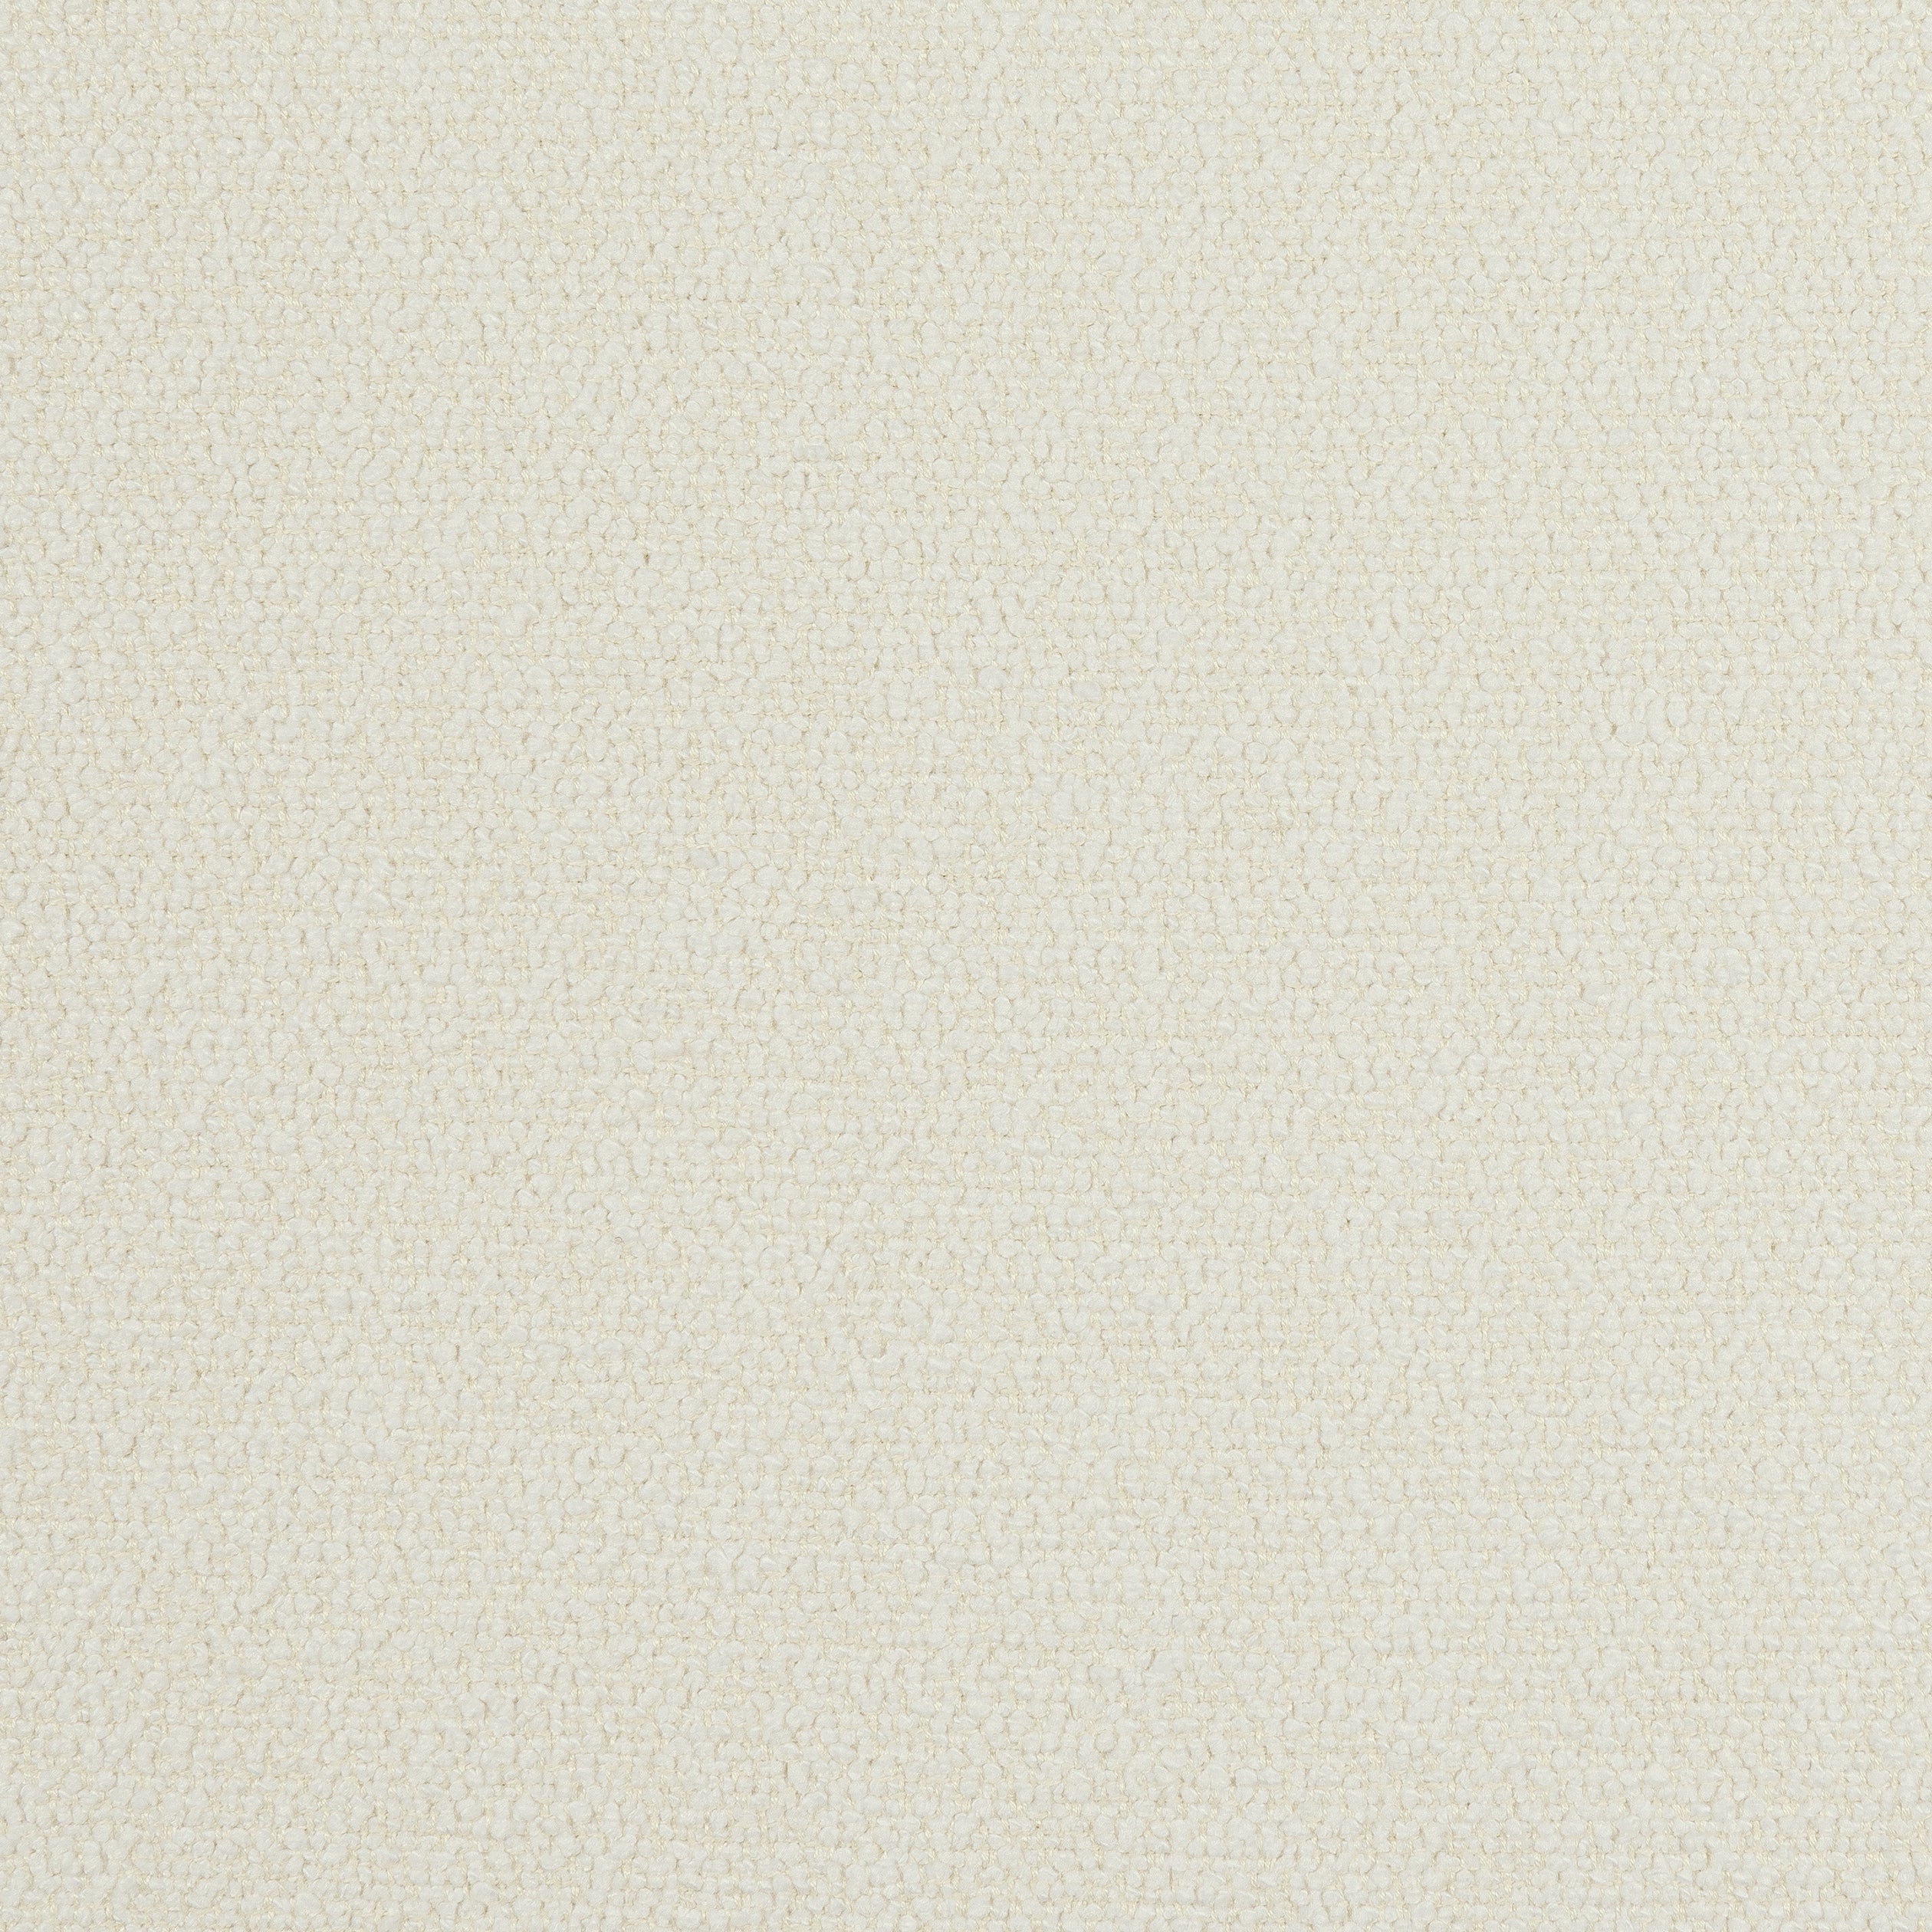 Dolcetto fabric in linen color - pattern number W8144 - by Thibaut in the Sereno collection